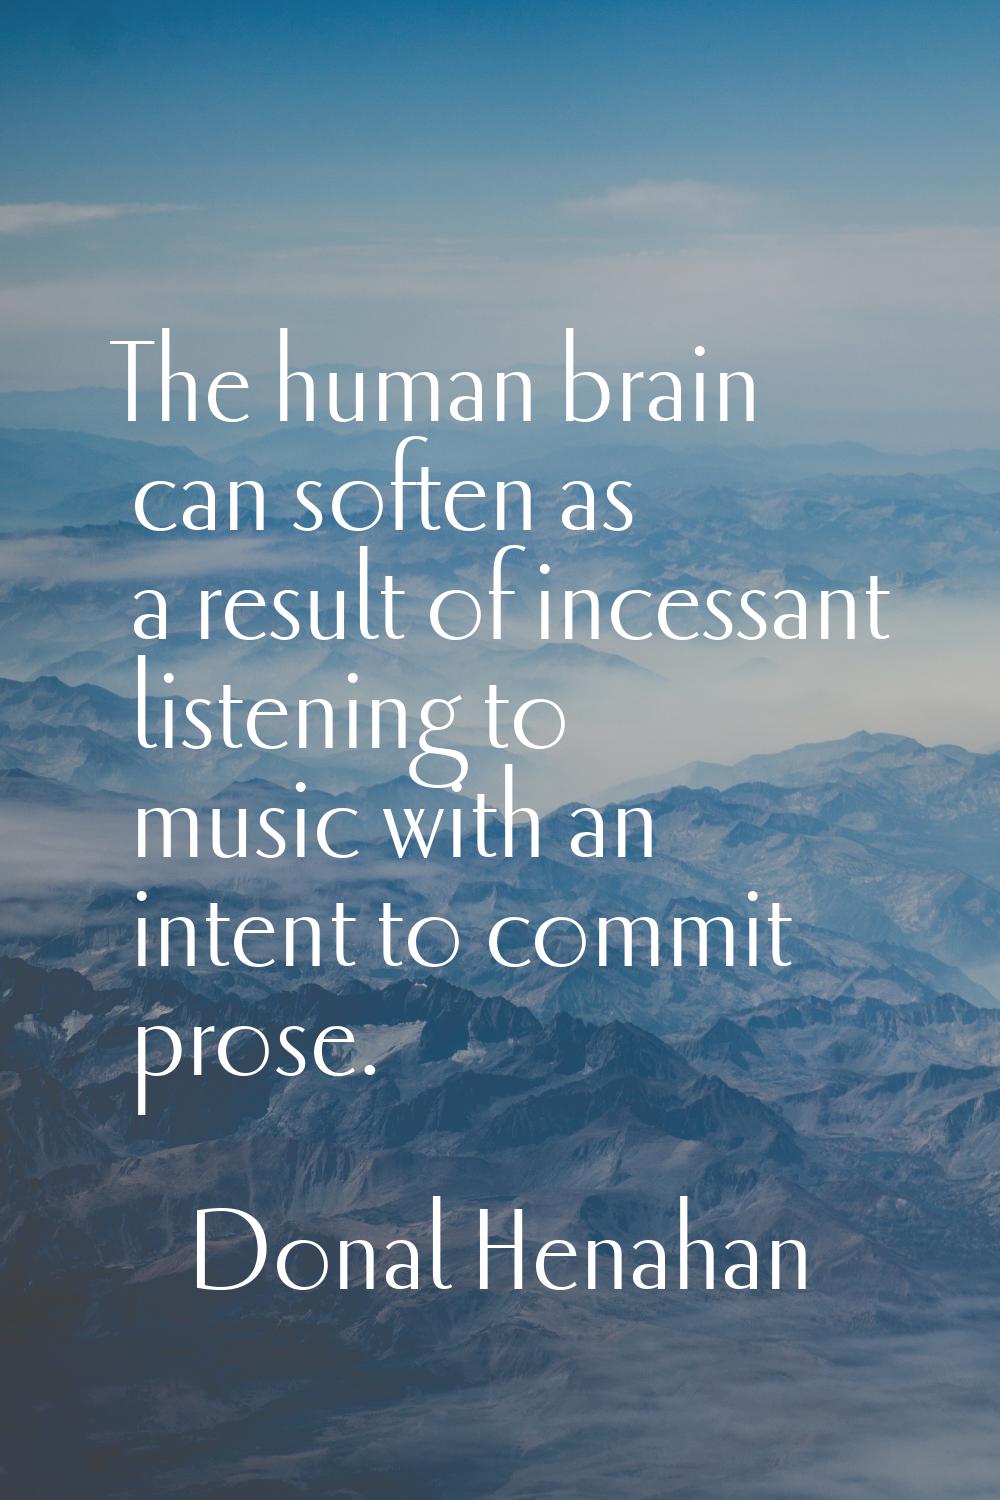 The human brain can soften as a result of incessant listening to music with an intent to commit pro